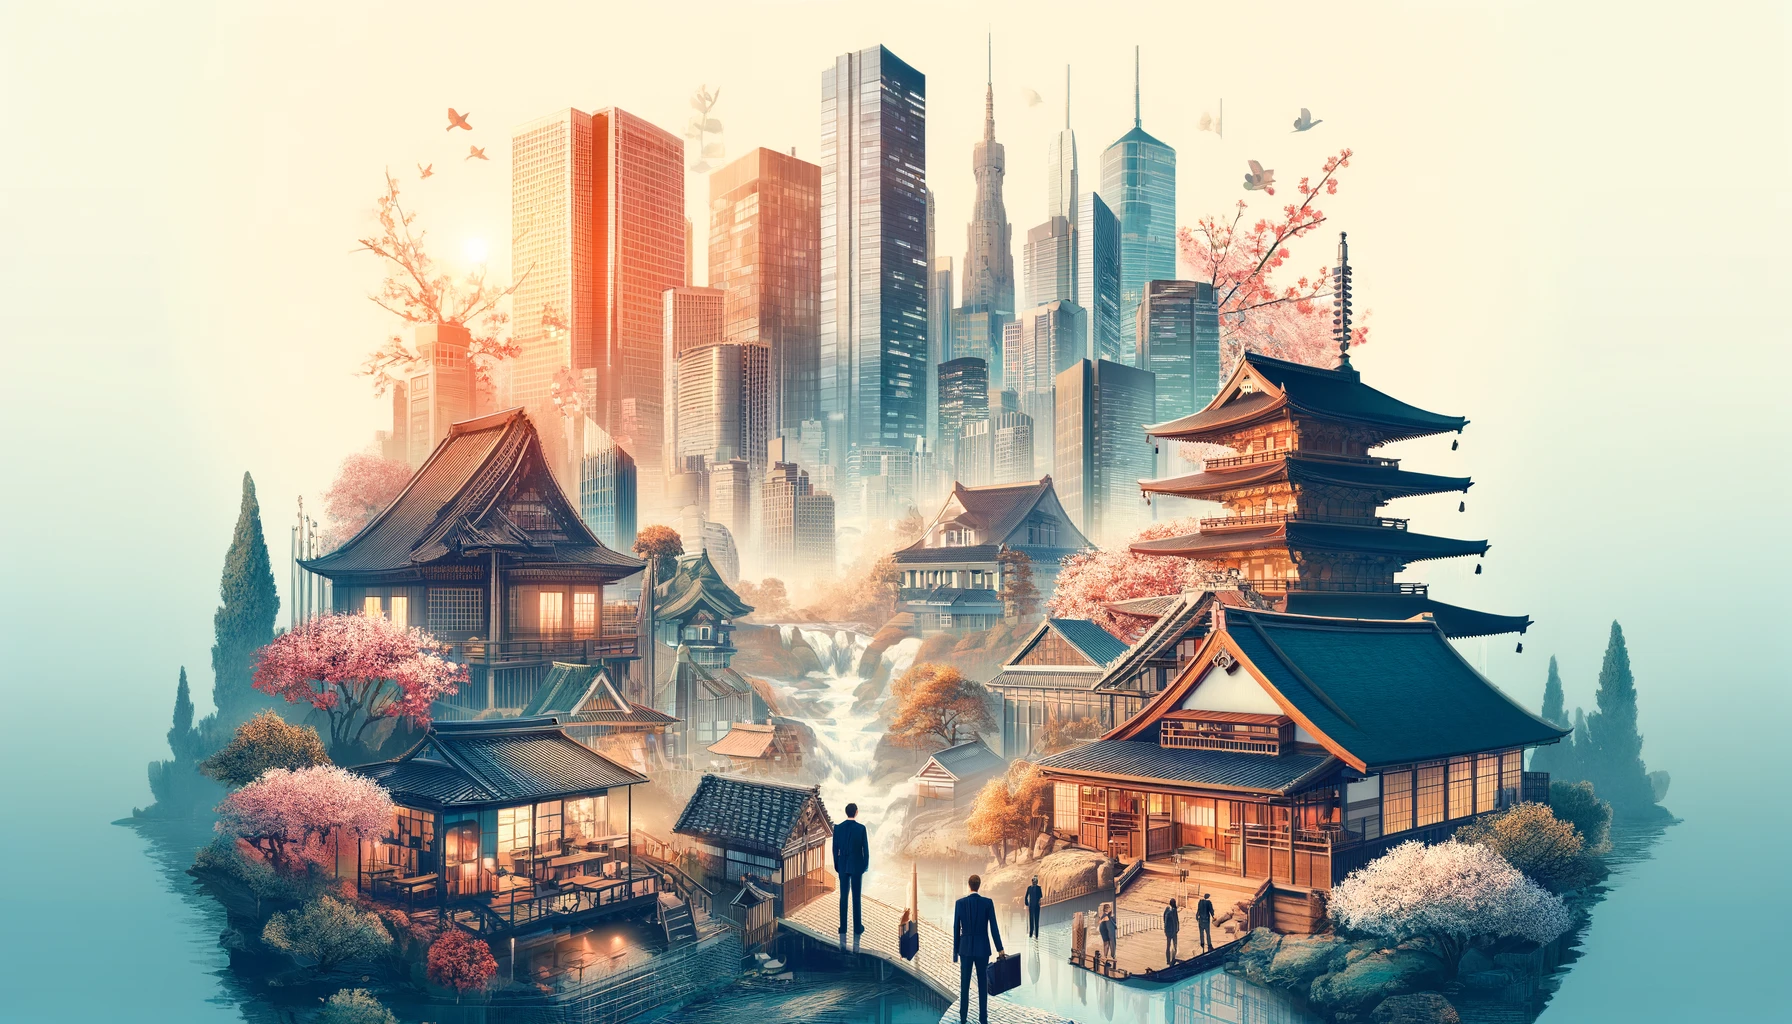 Dynamic blend of Japan's urban skyline with traditional elements like cherry blossoms and tea houses, symbolizing opportunities for foreign entrepreneurs in Japan